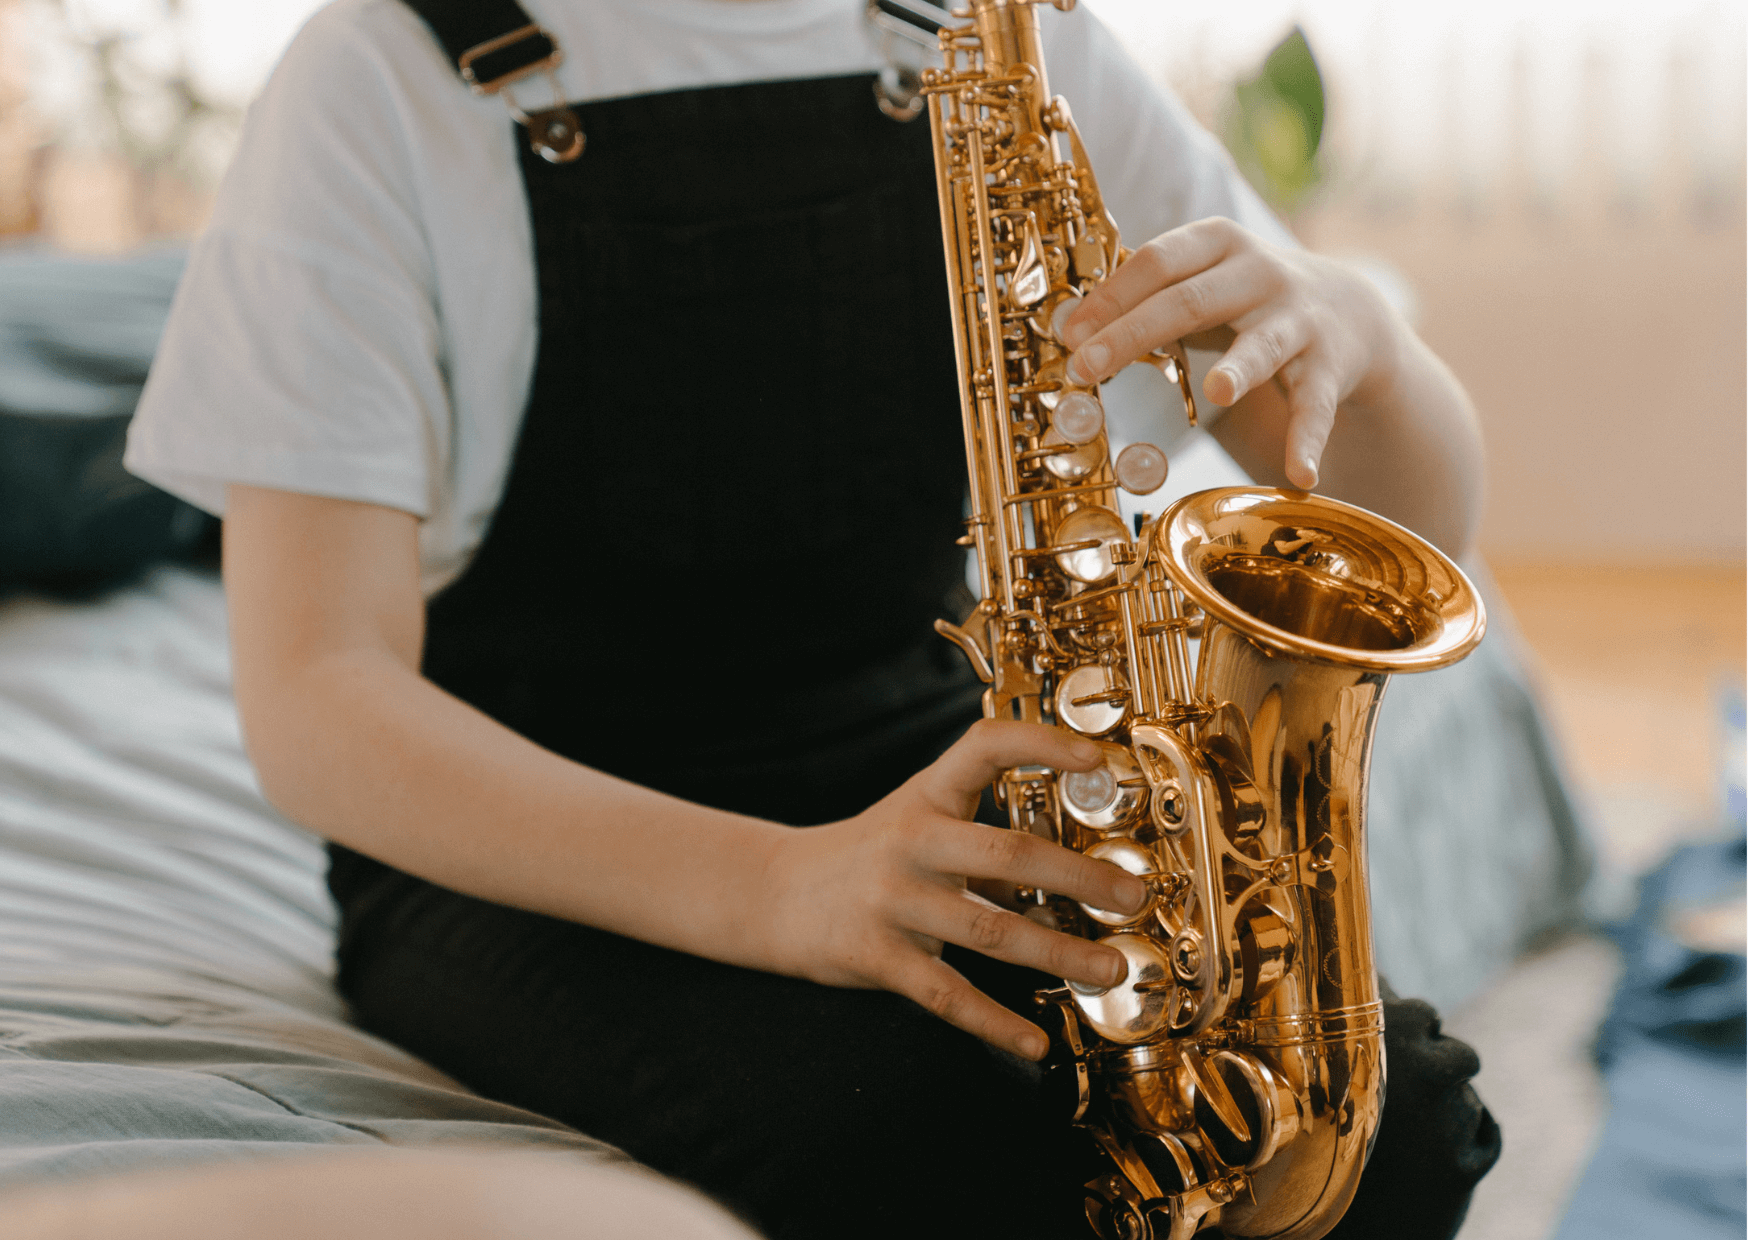 Picture of a person learning to play saxophone